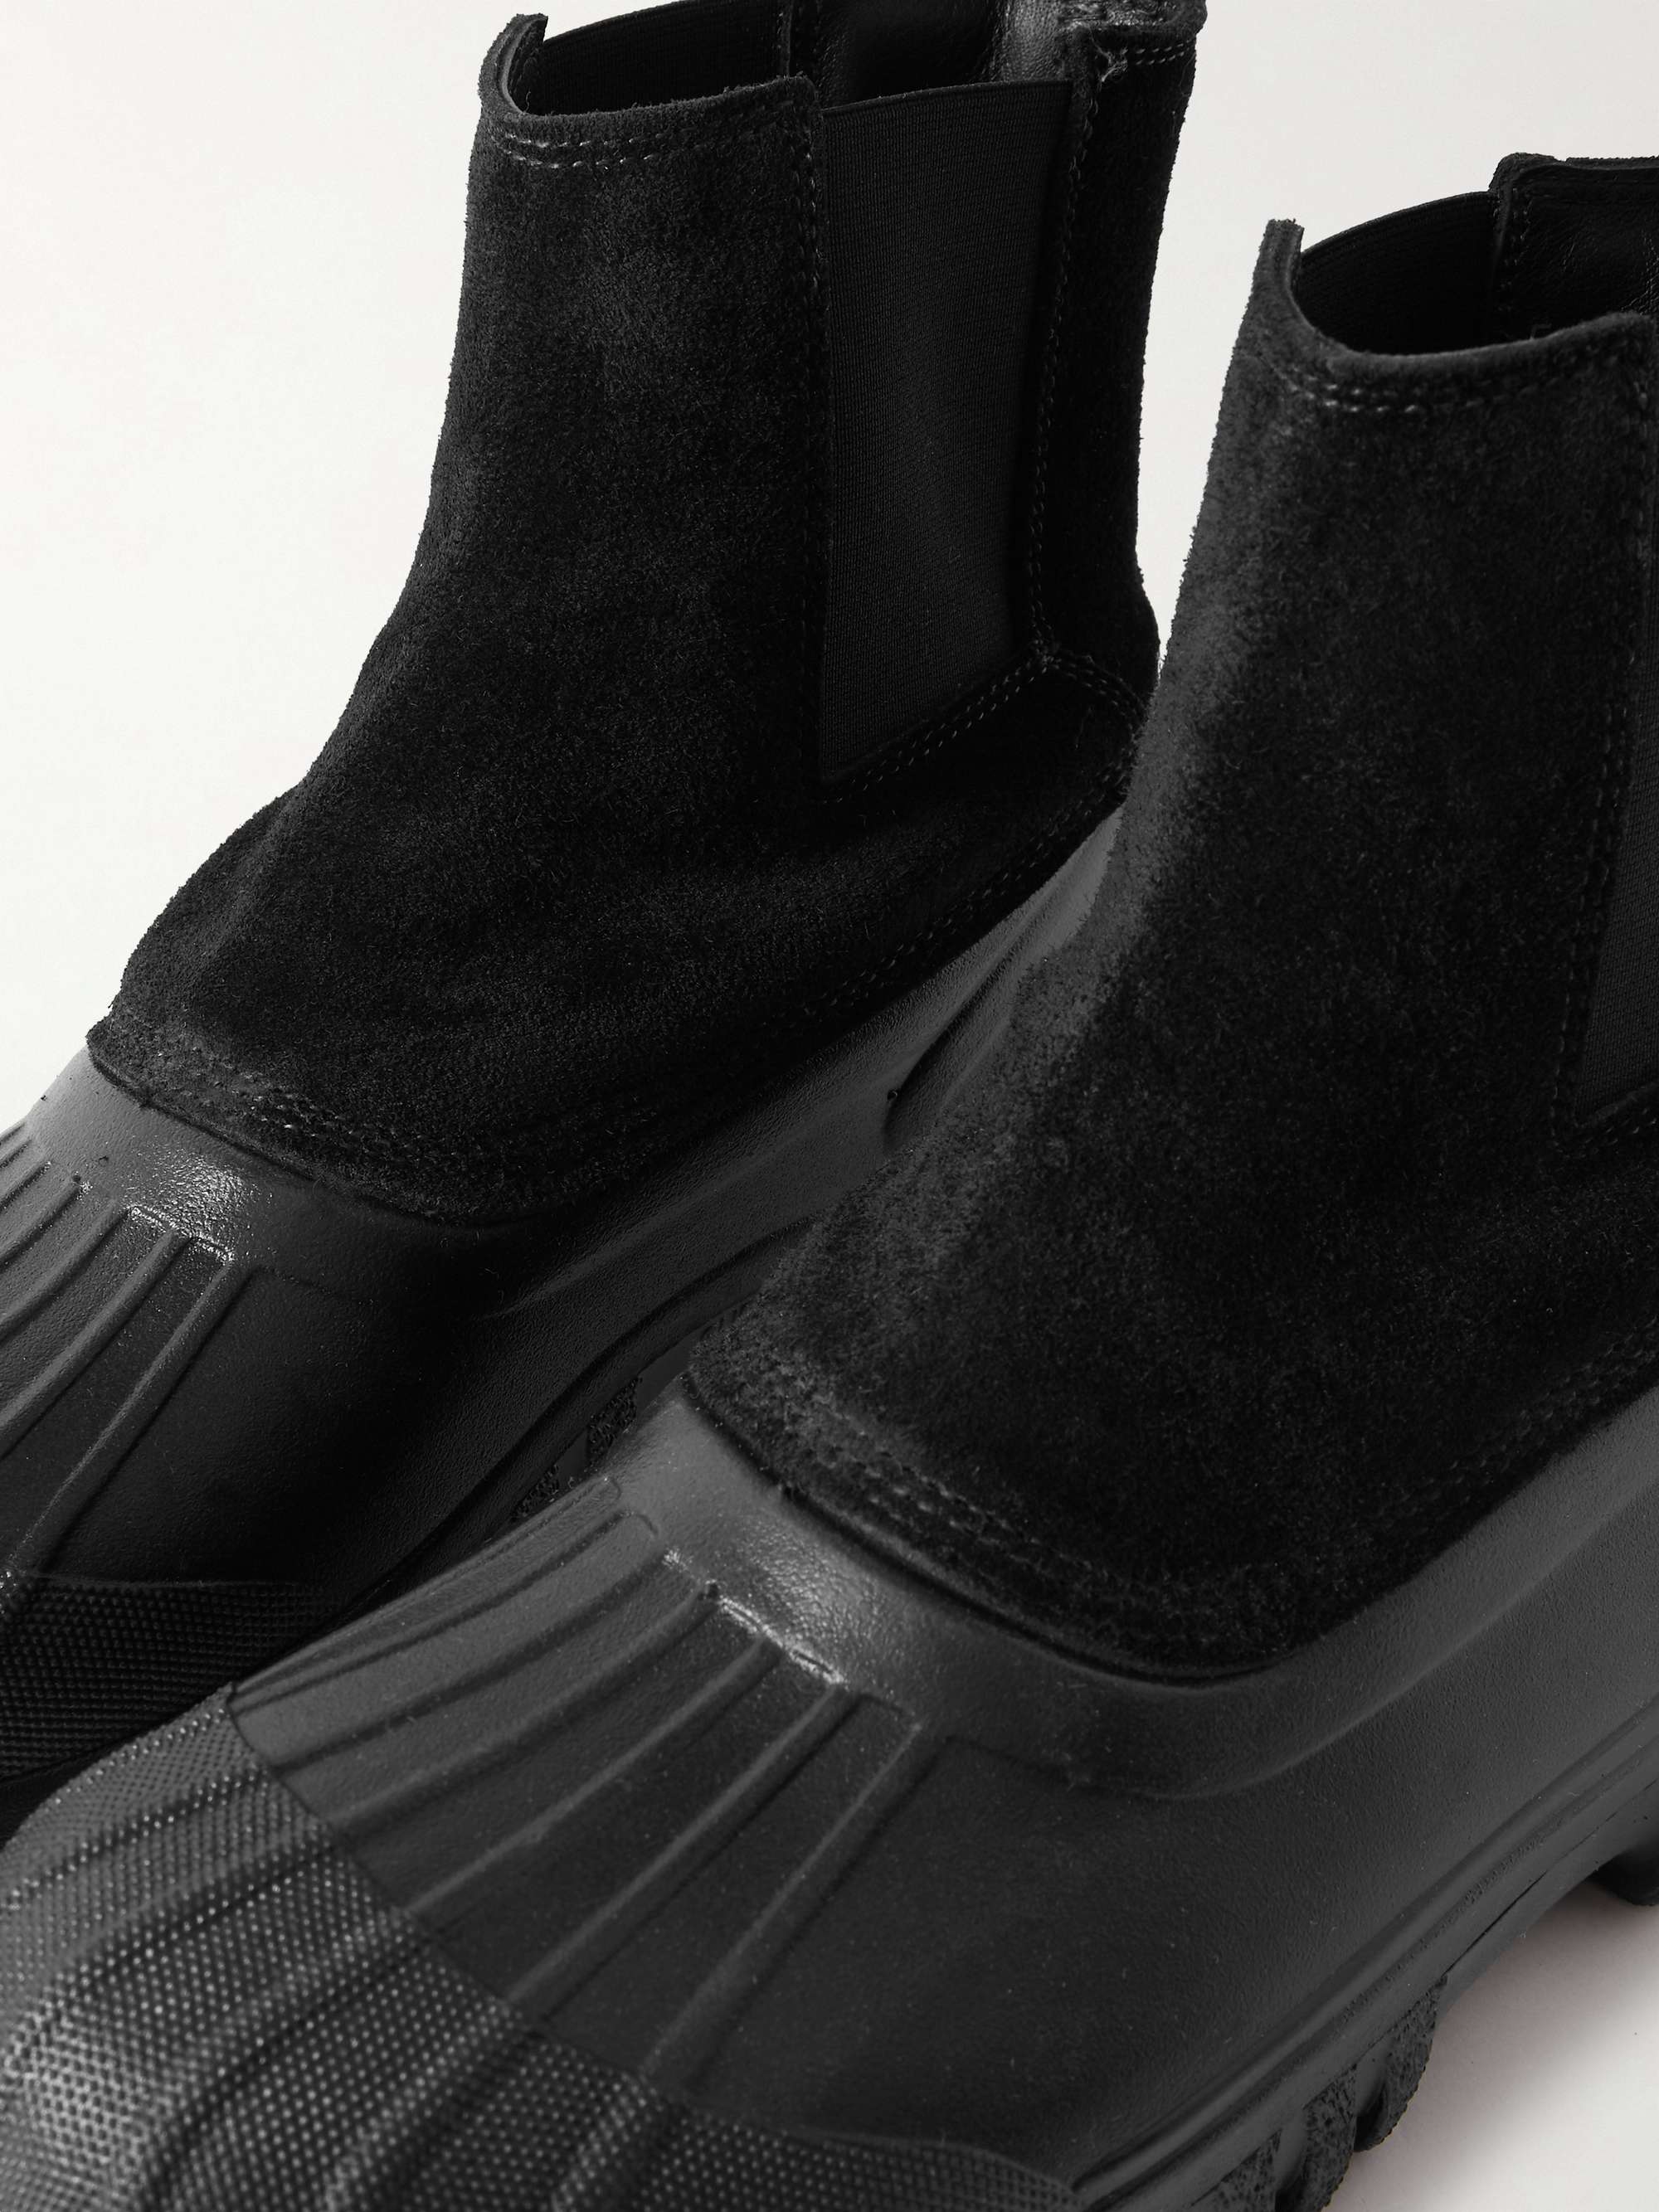 DIEMME Balbi Suede and Rubber Chelsea Boots